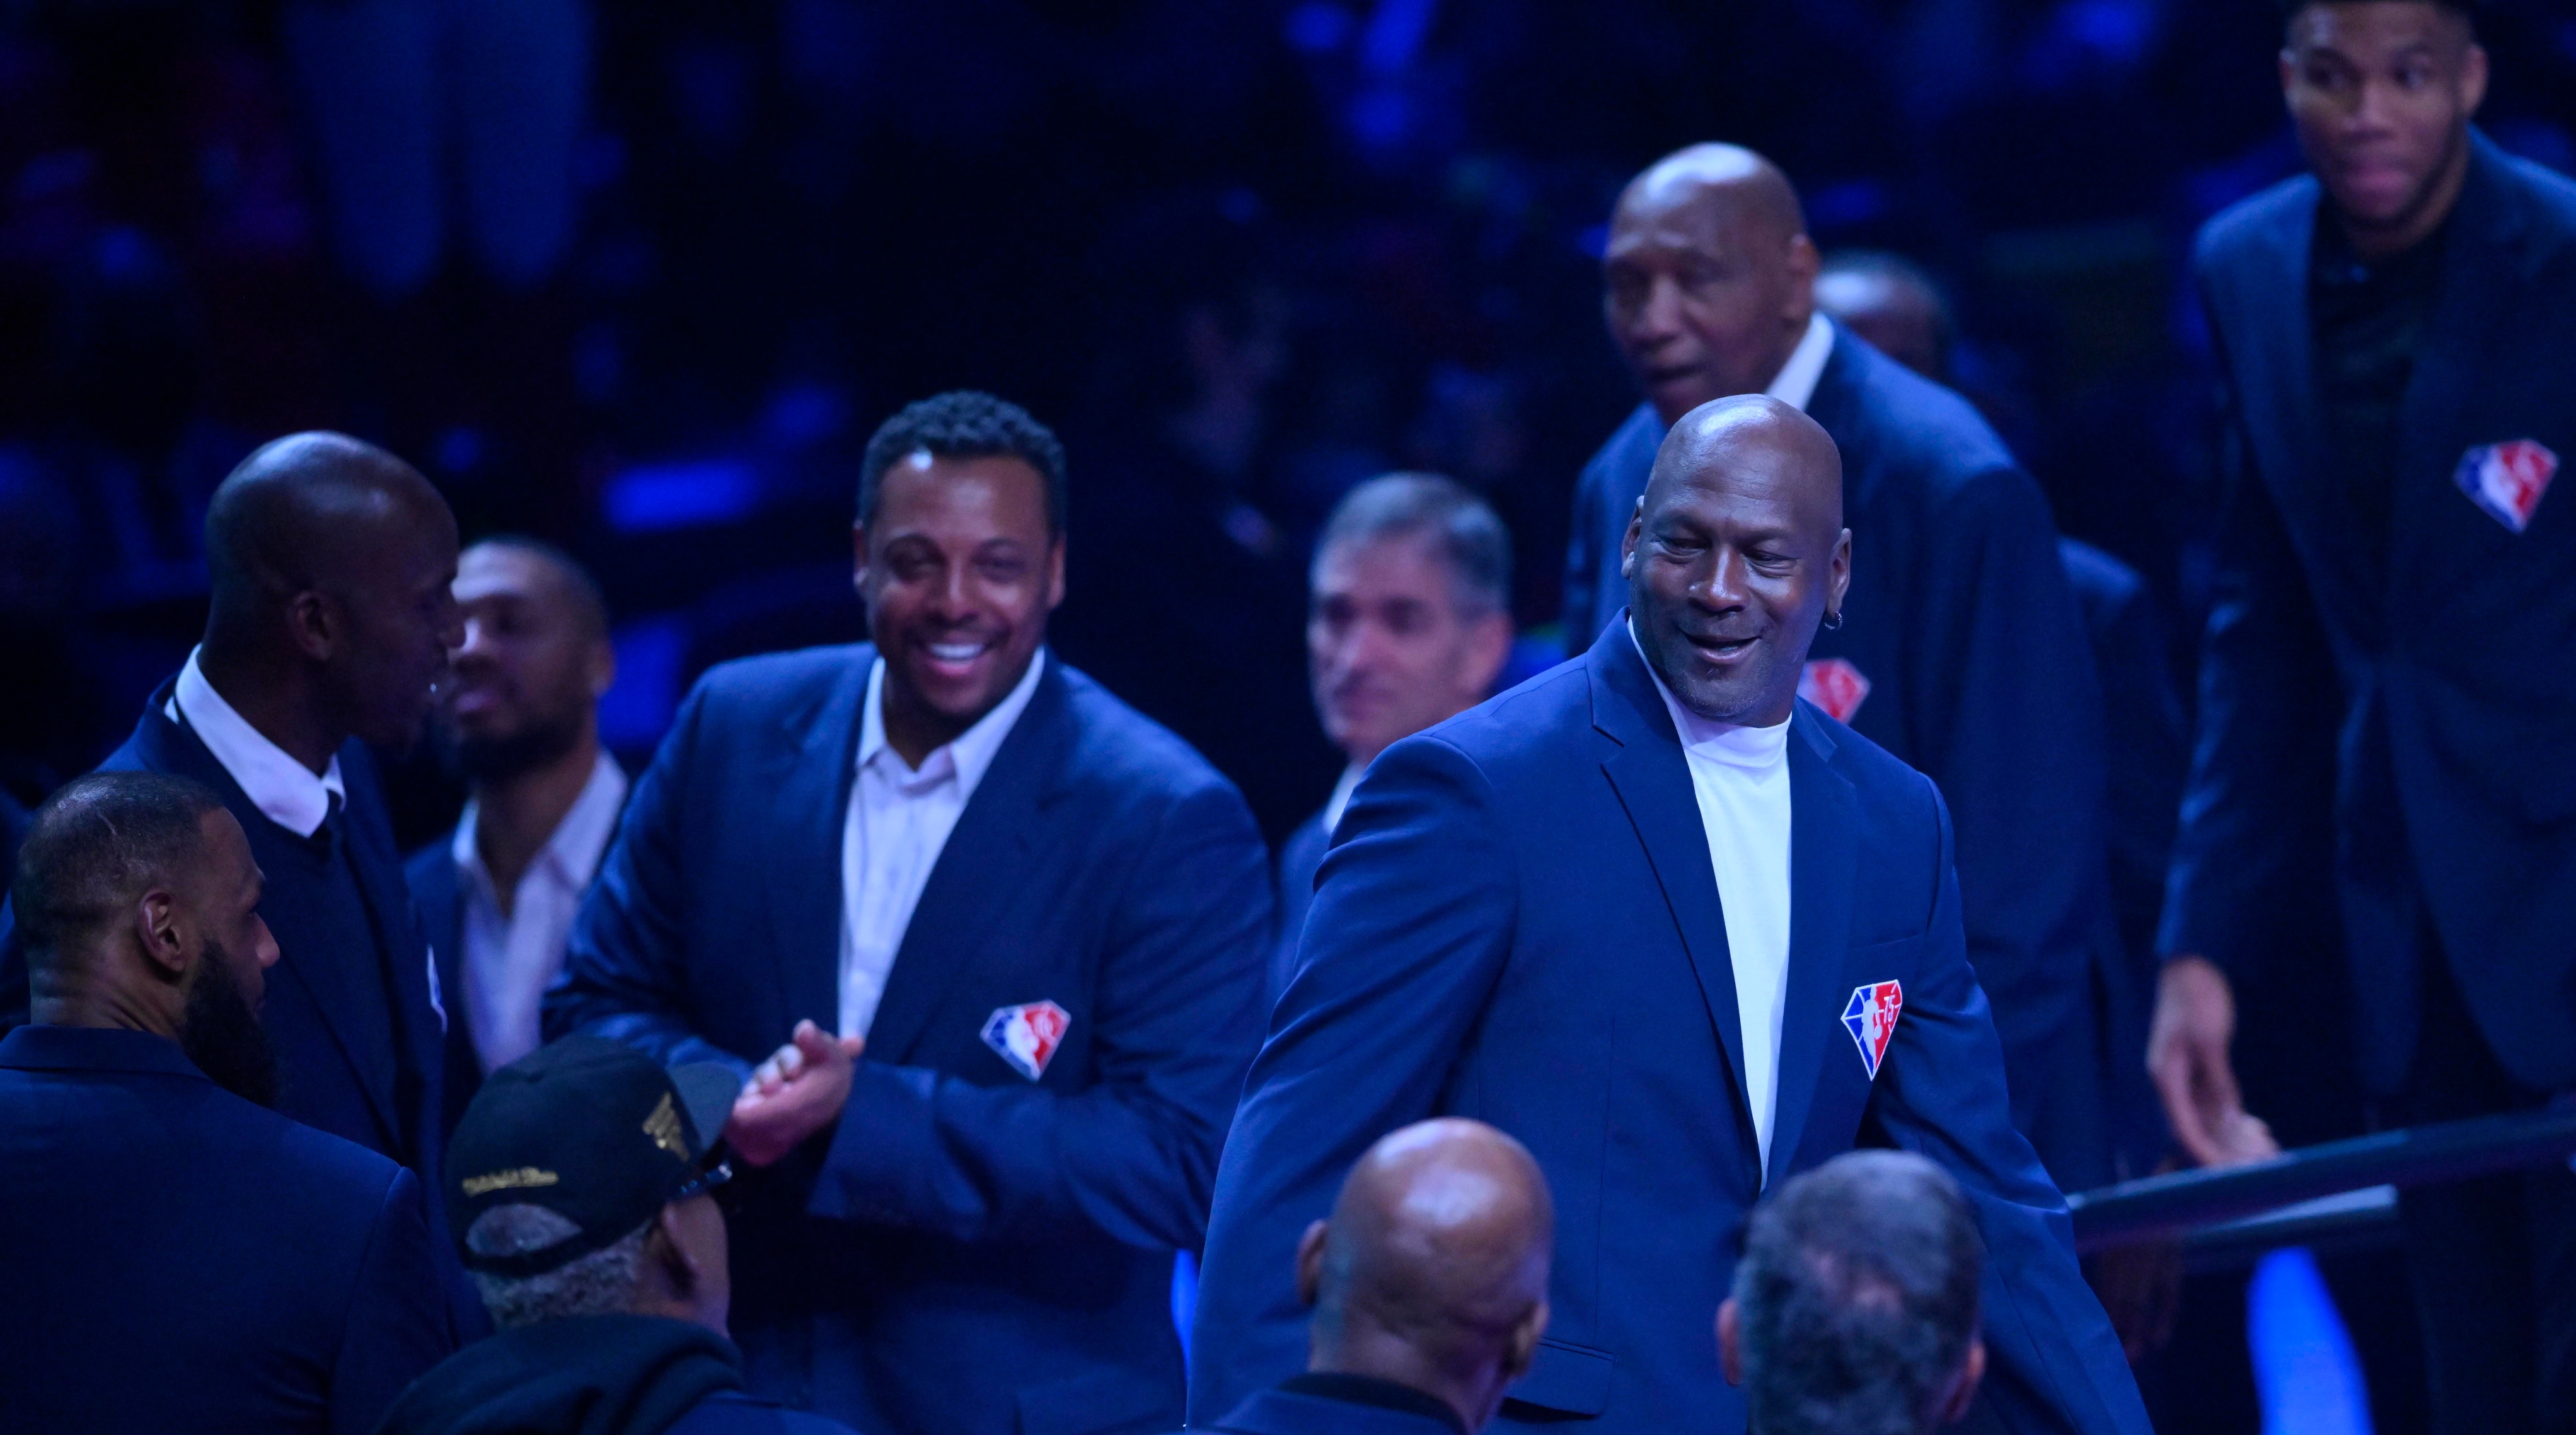 NBA honors 75 greatest players at halftime of 2022 All-Star Game